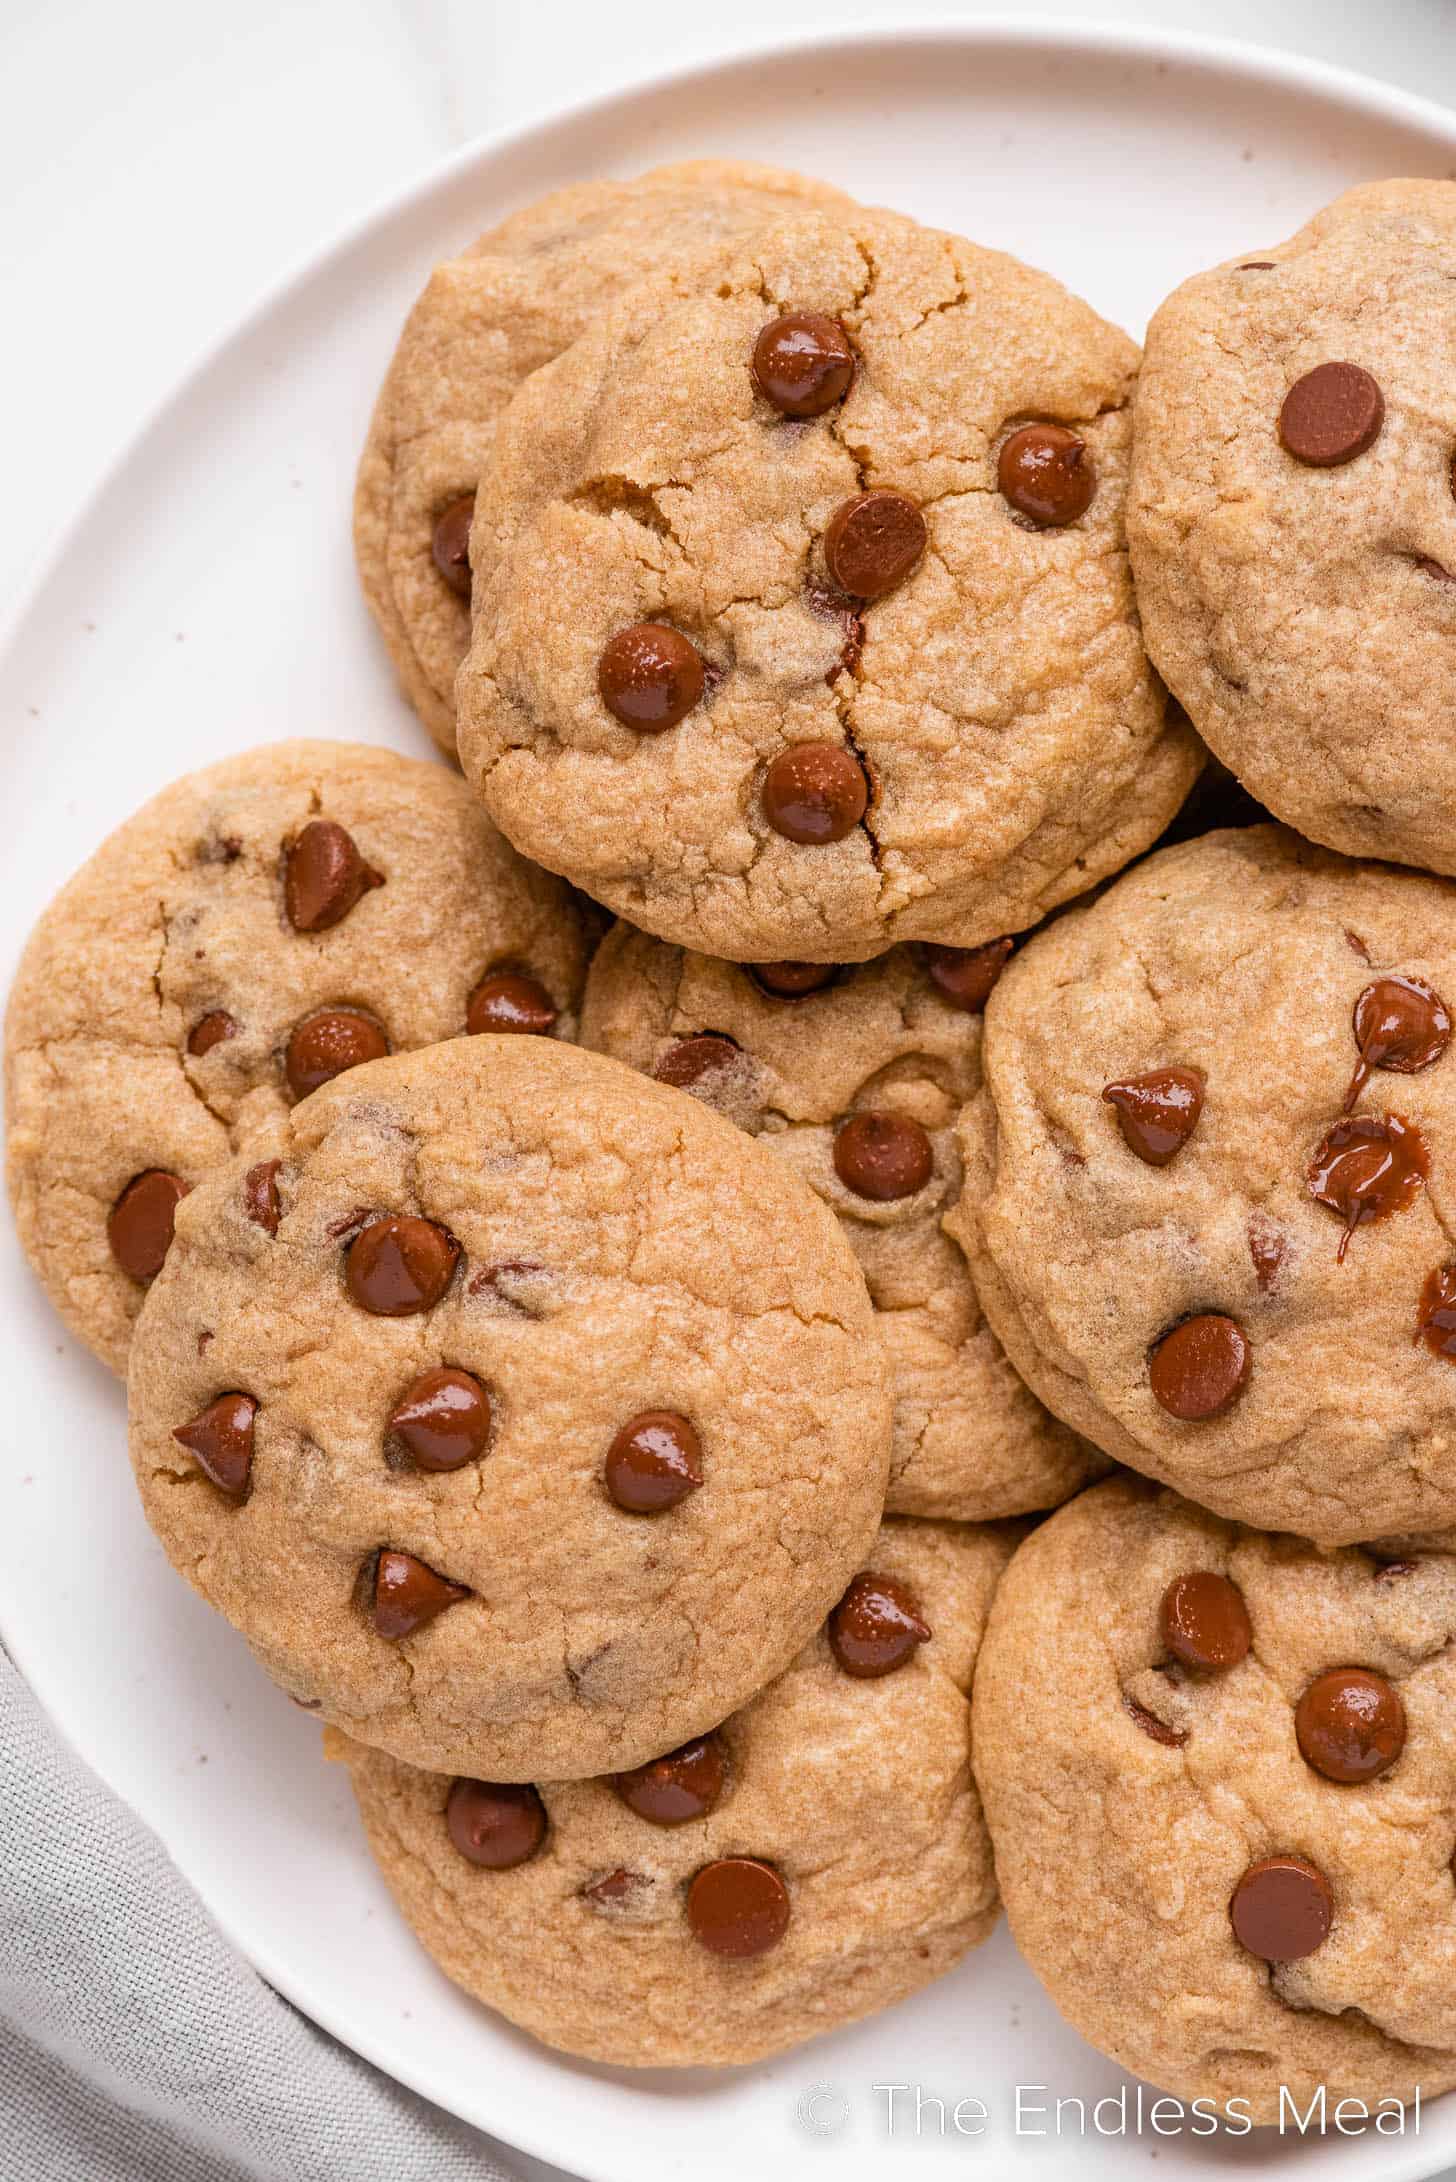 A close up of a plate of whole wheat cookies with chocolate chips.